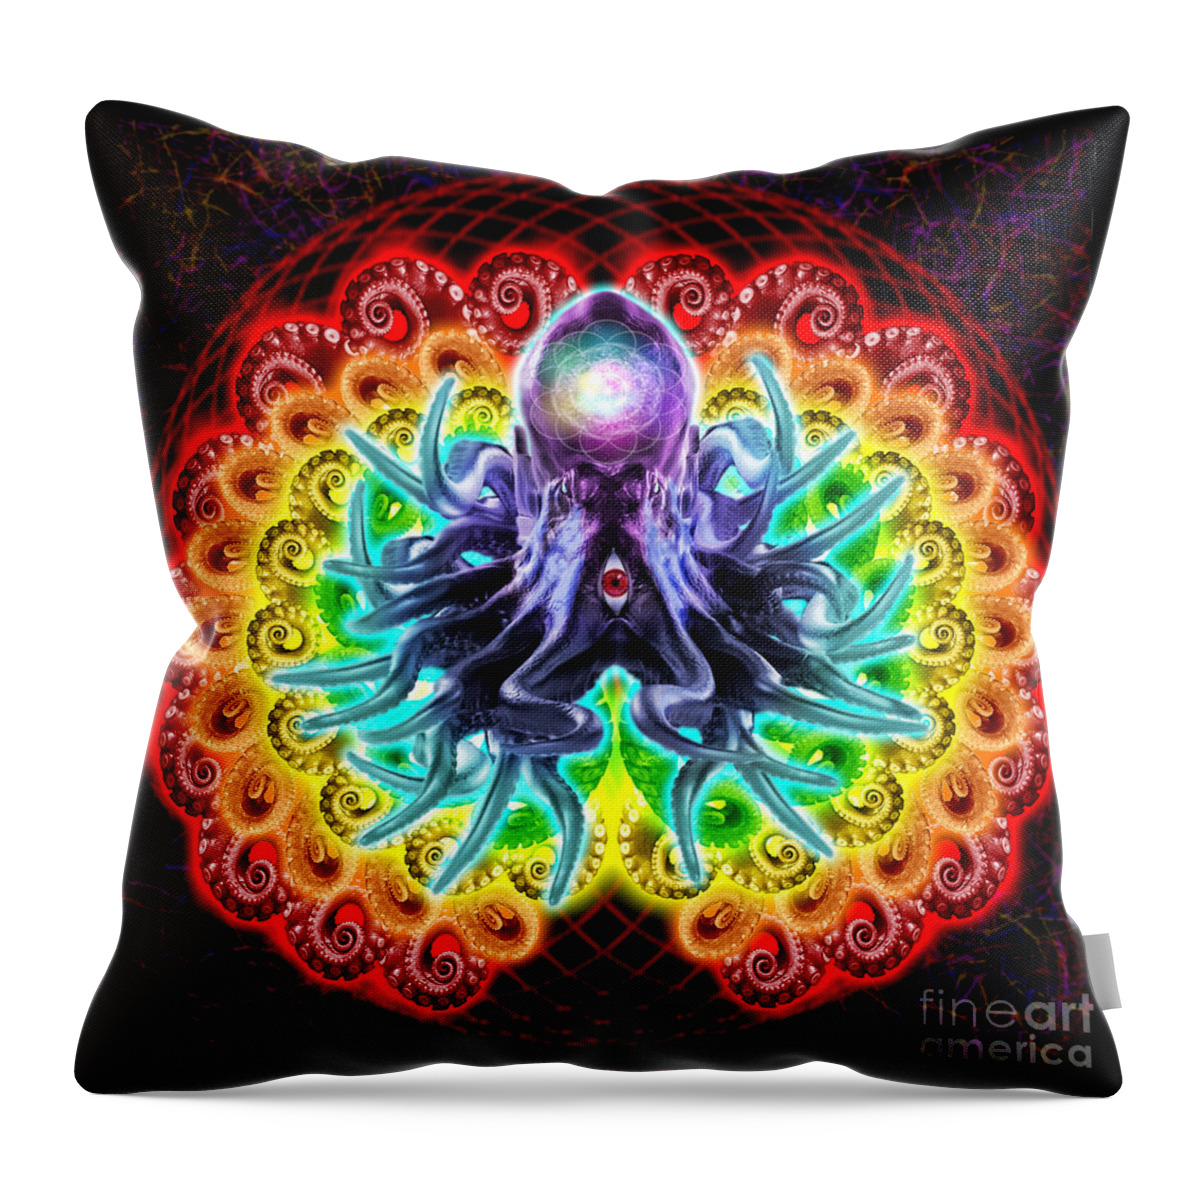 Octopus Throw Pillow featuring the mixed media Reaching Out by Tony Koehl